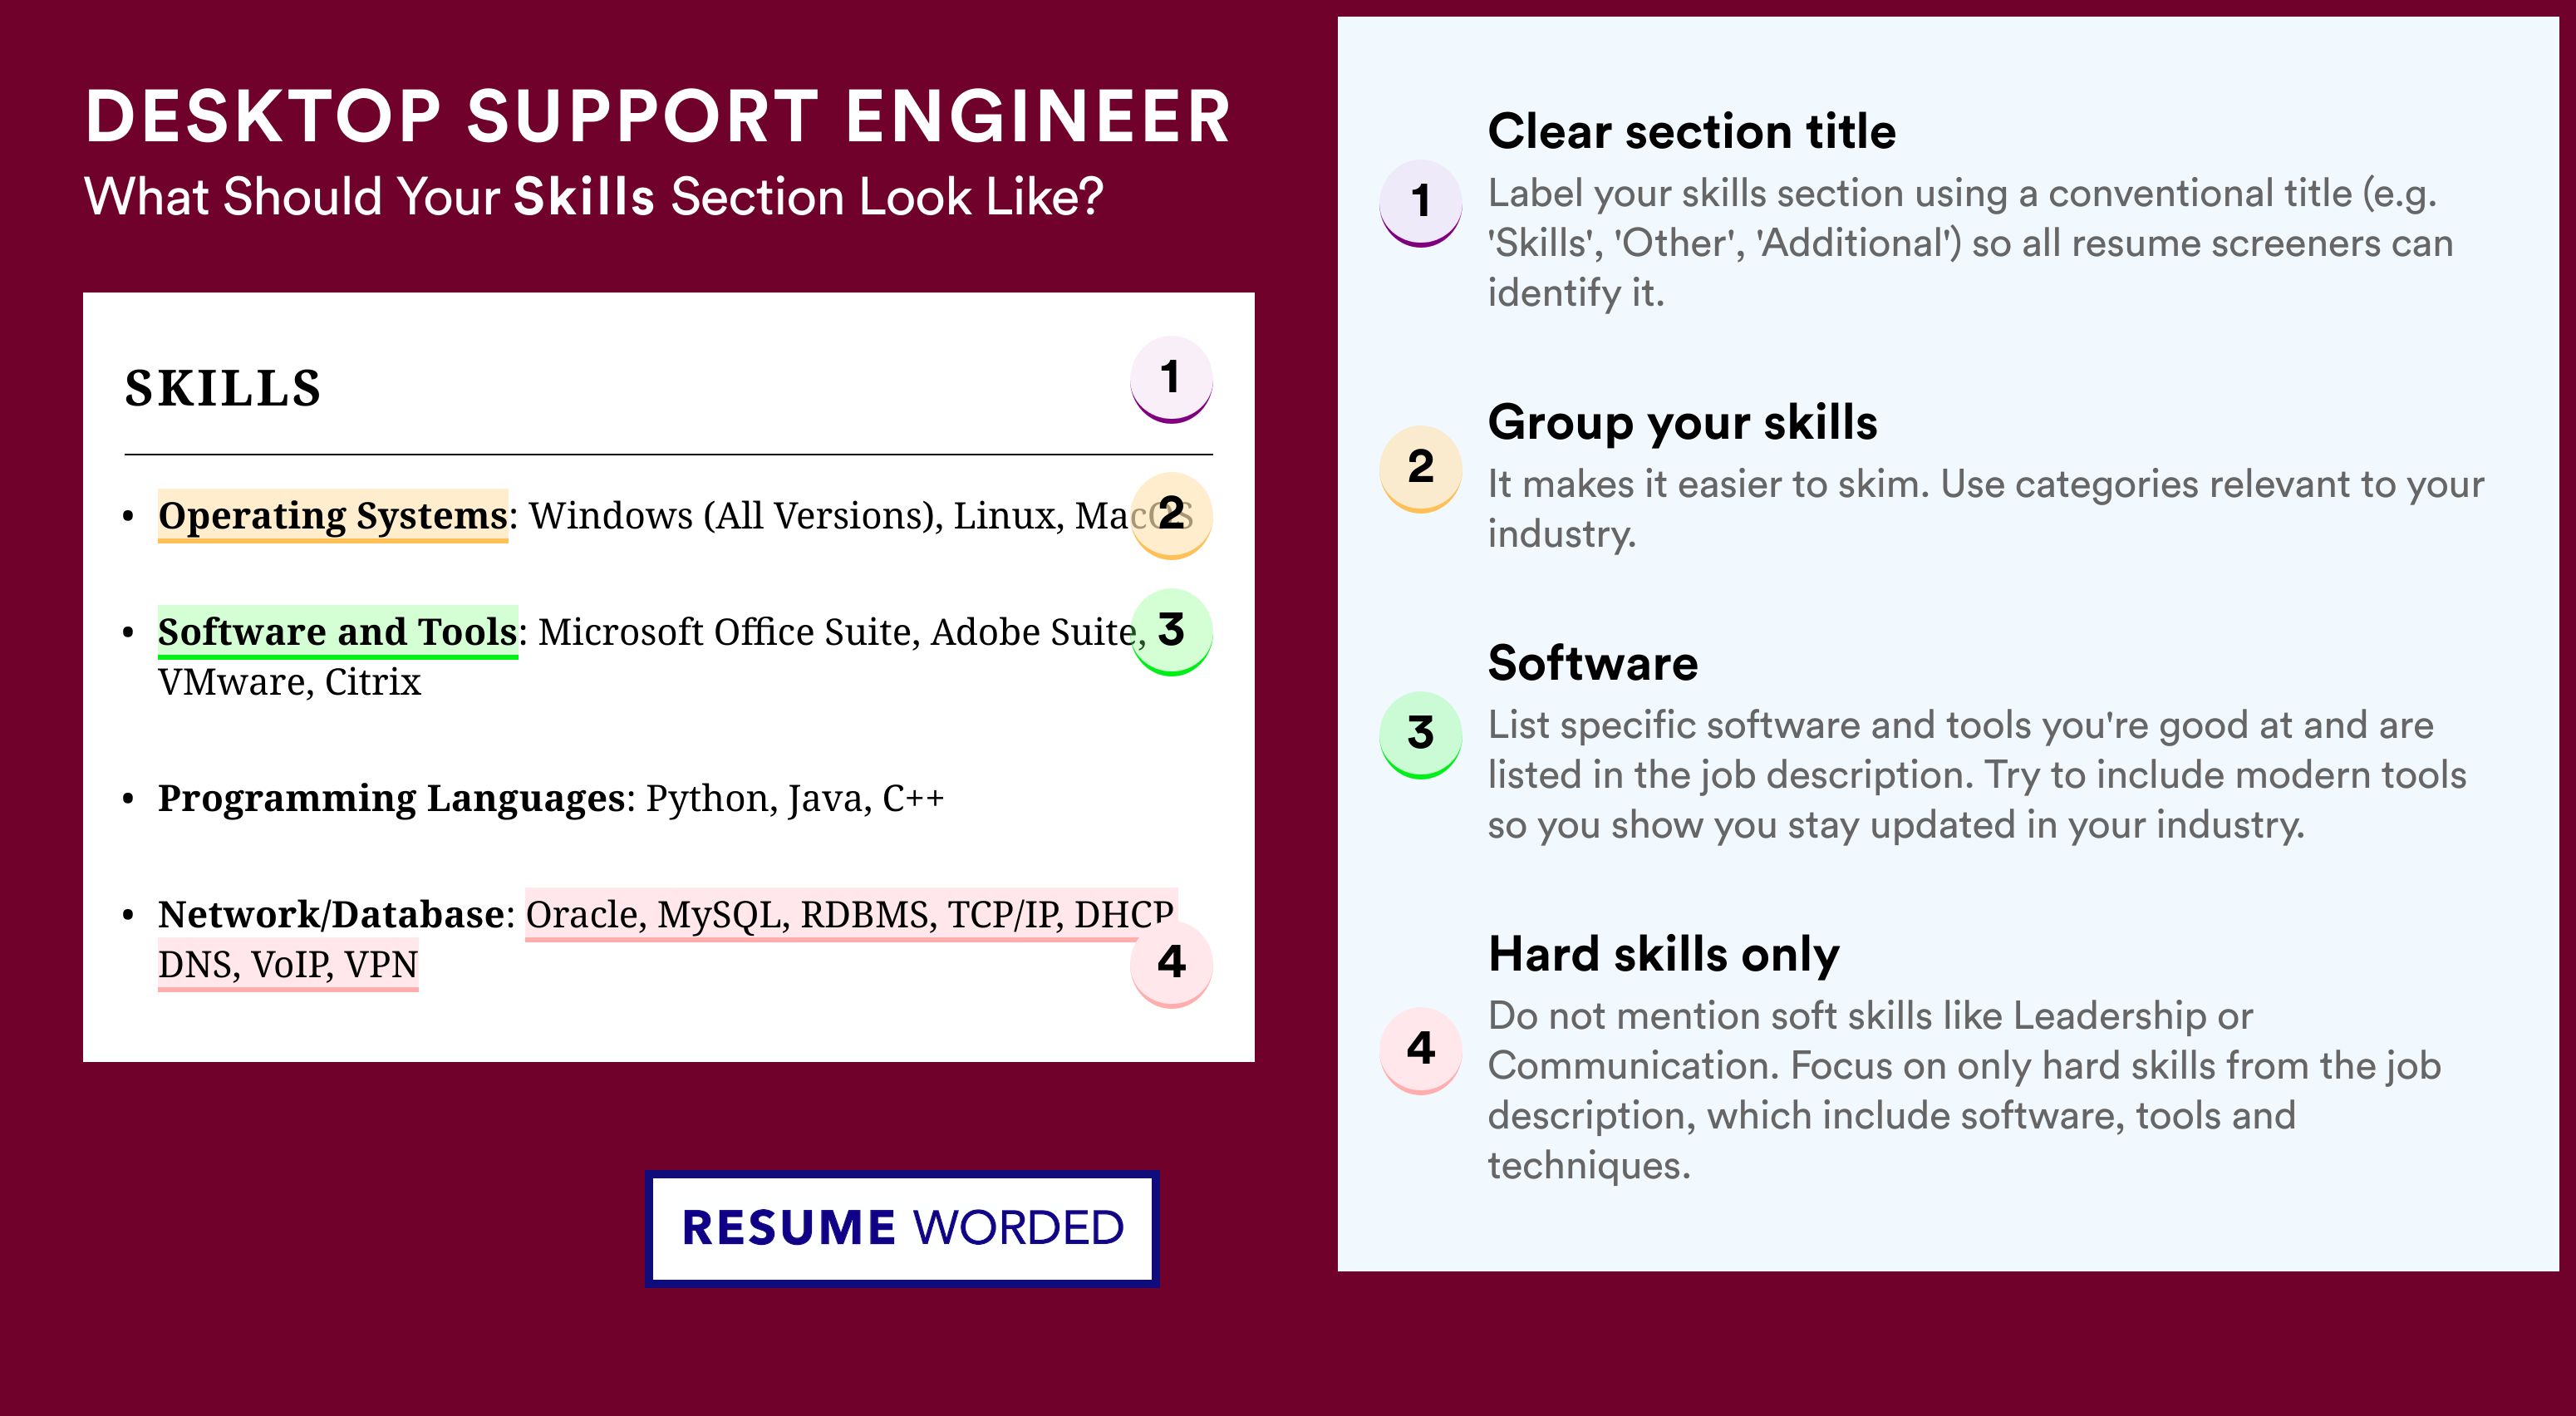 How To Write Your Skills Section - Desktop Support Engineer Roles